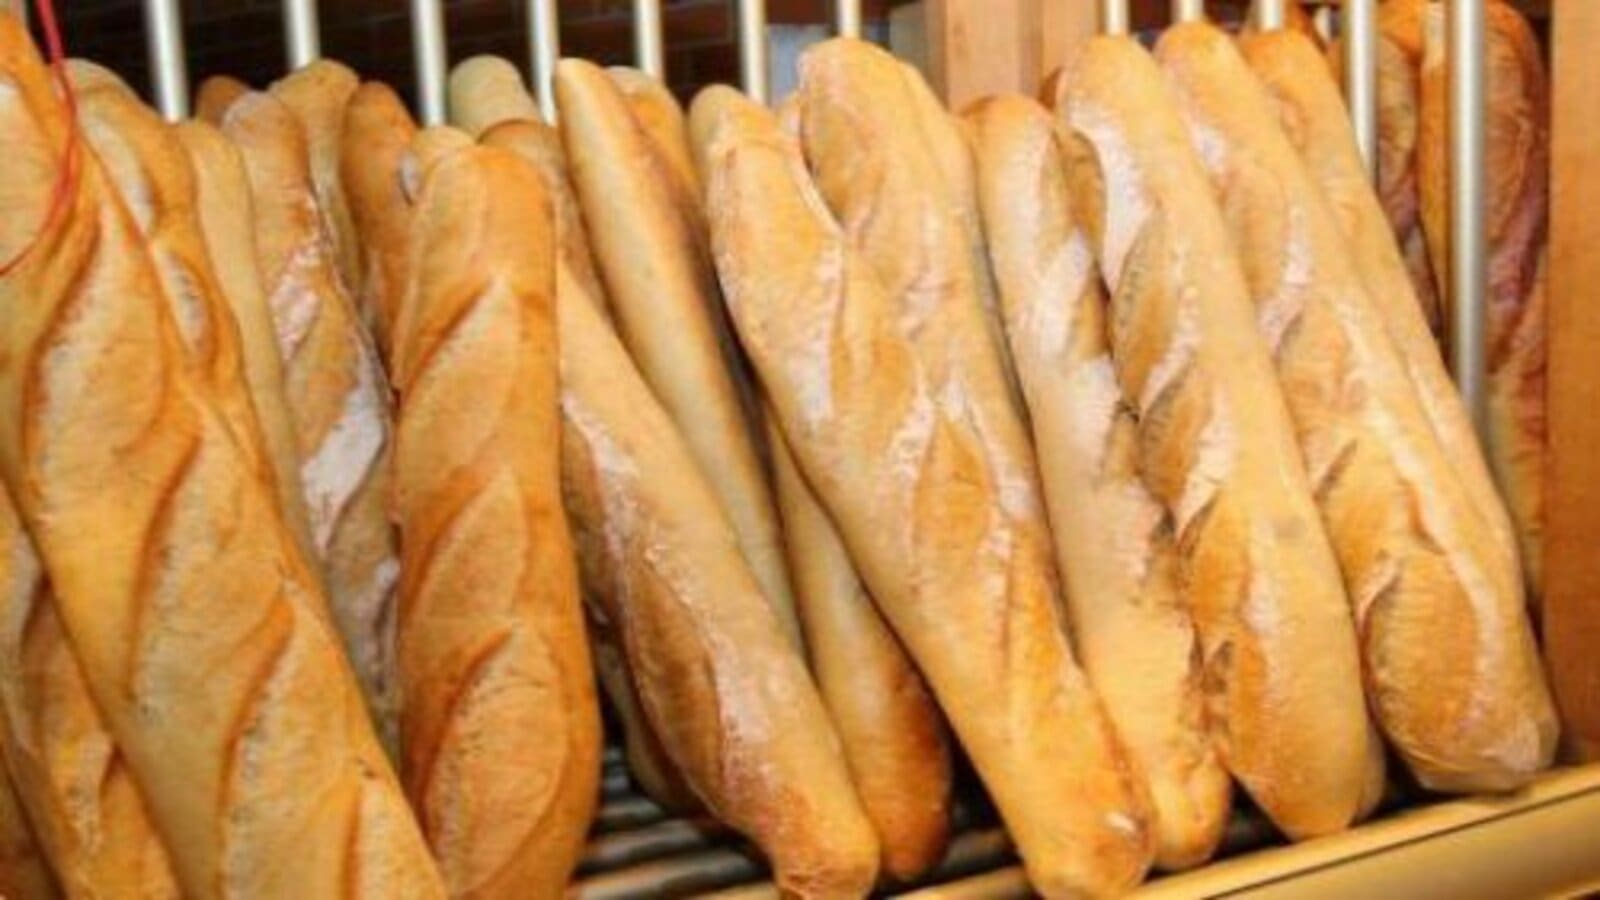 Cameroon government criticizes bakers’ price reduction on baguettes, calls it small, inadequate